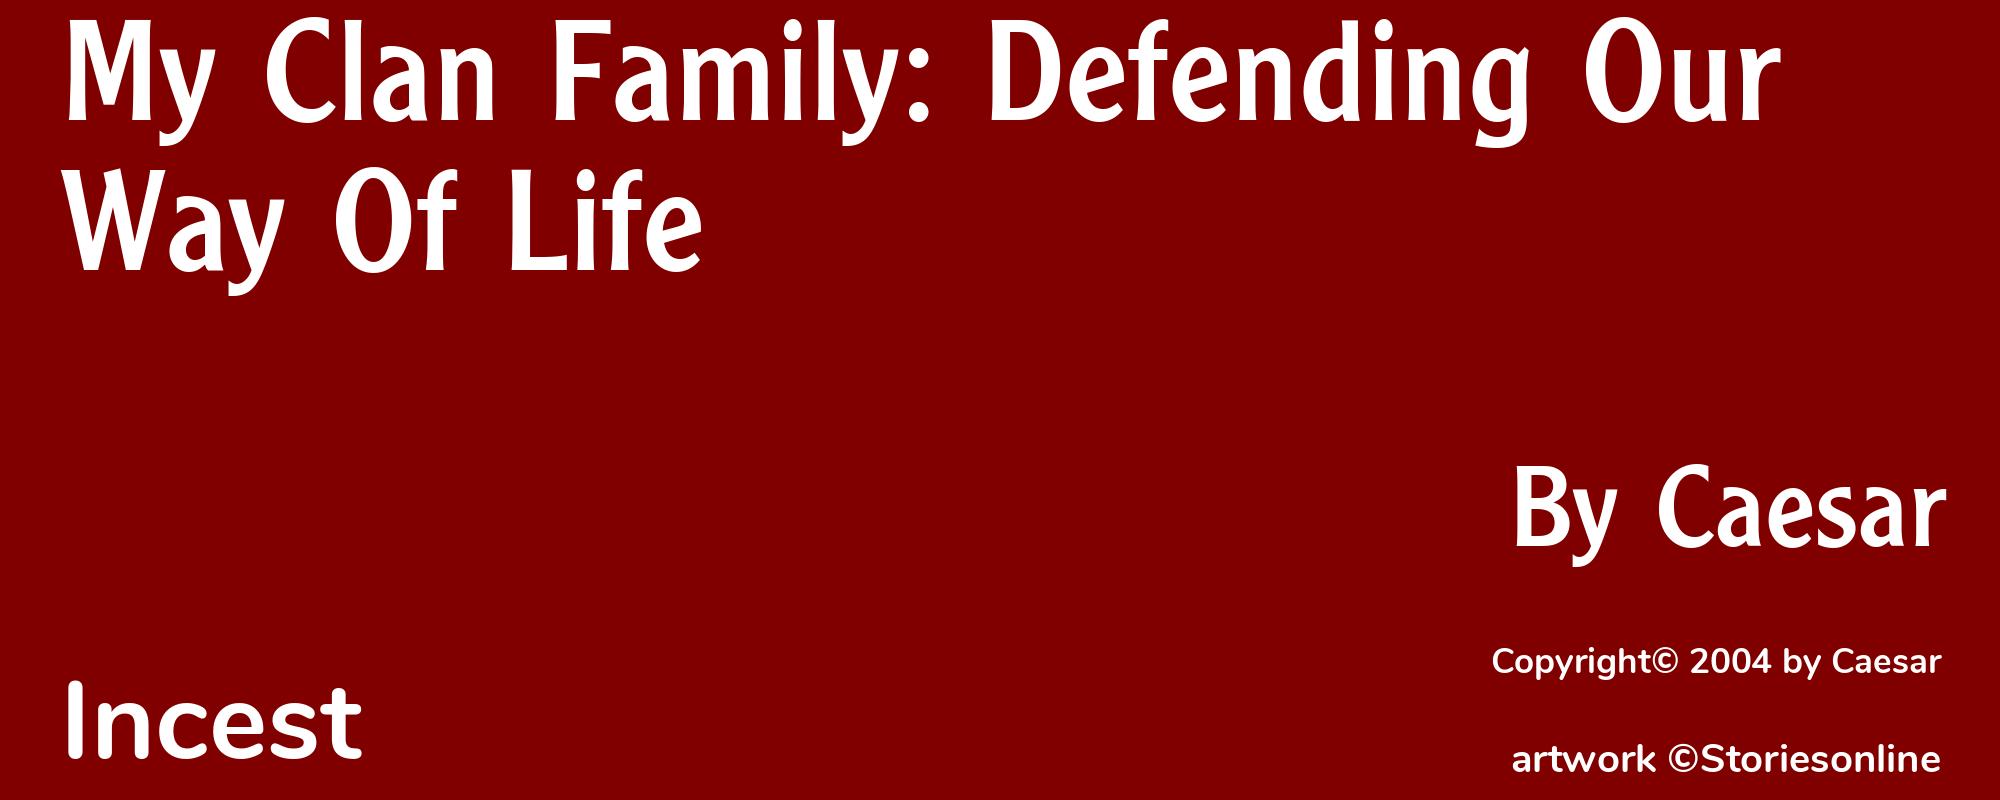 My Clan Family: Defending Our Way Of Life - Cover